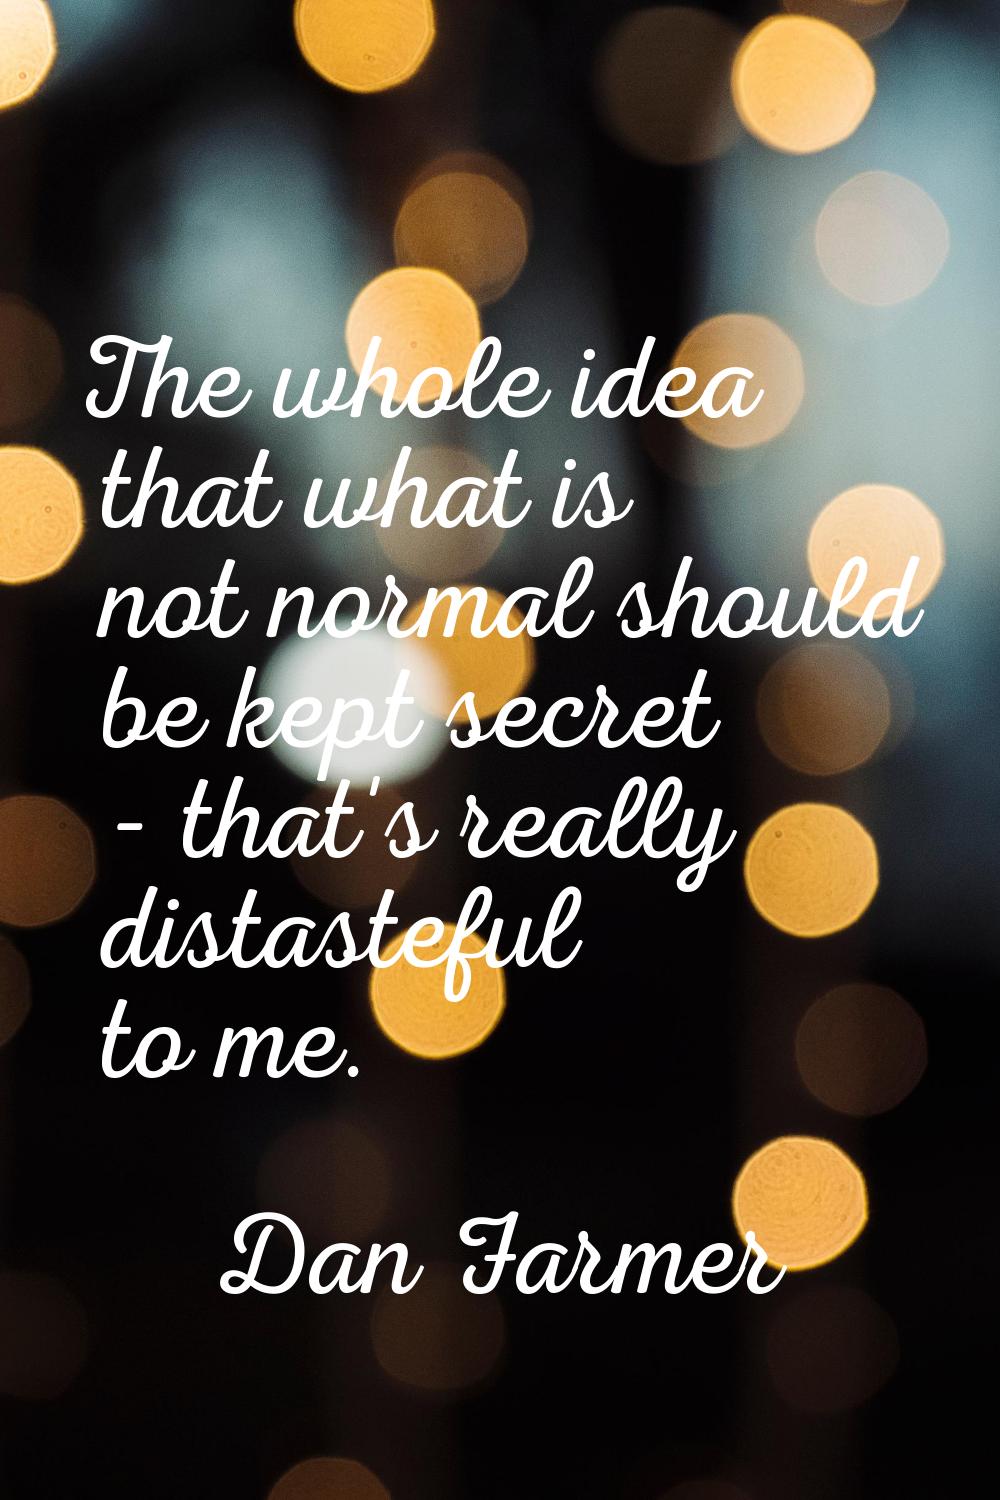 The whole idea that what is not normal should be kept secret - that's really distasteful to me.